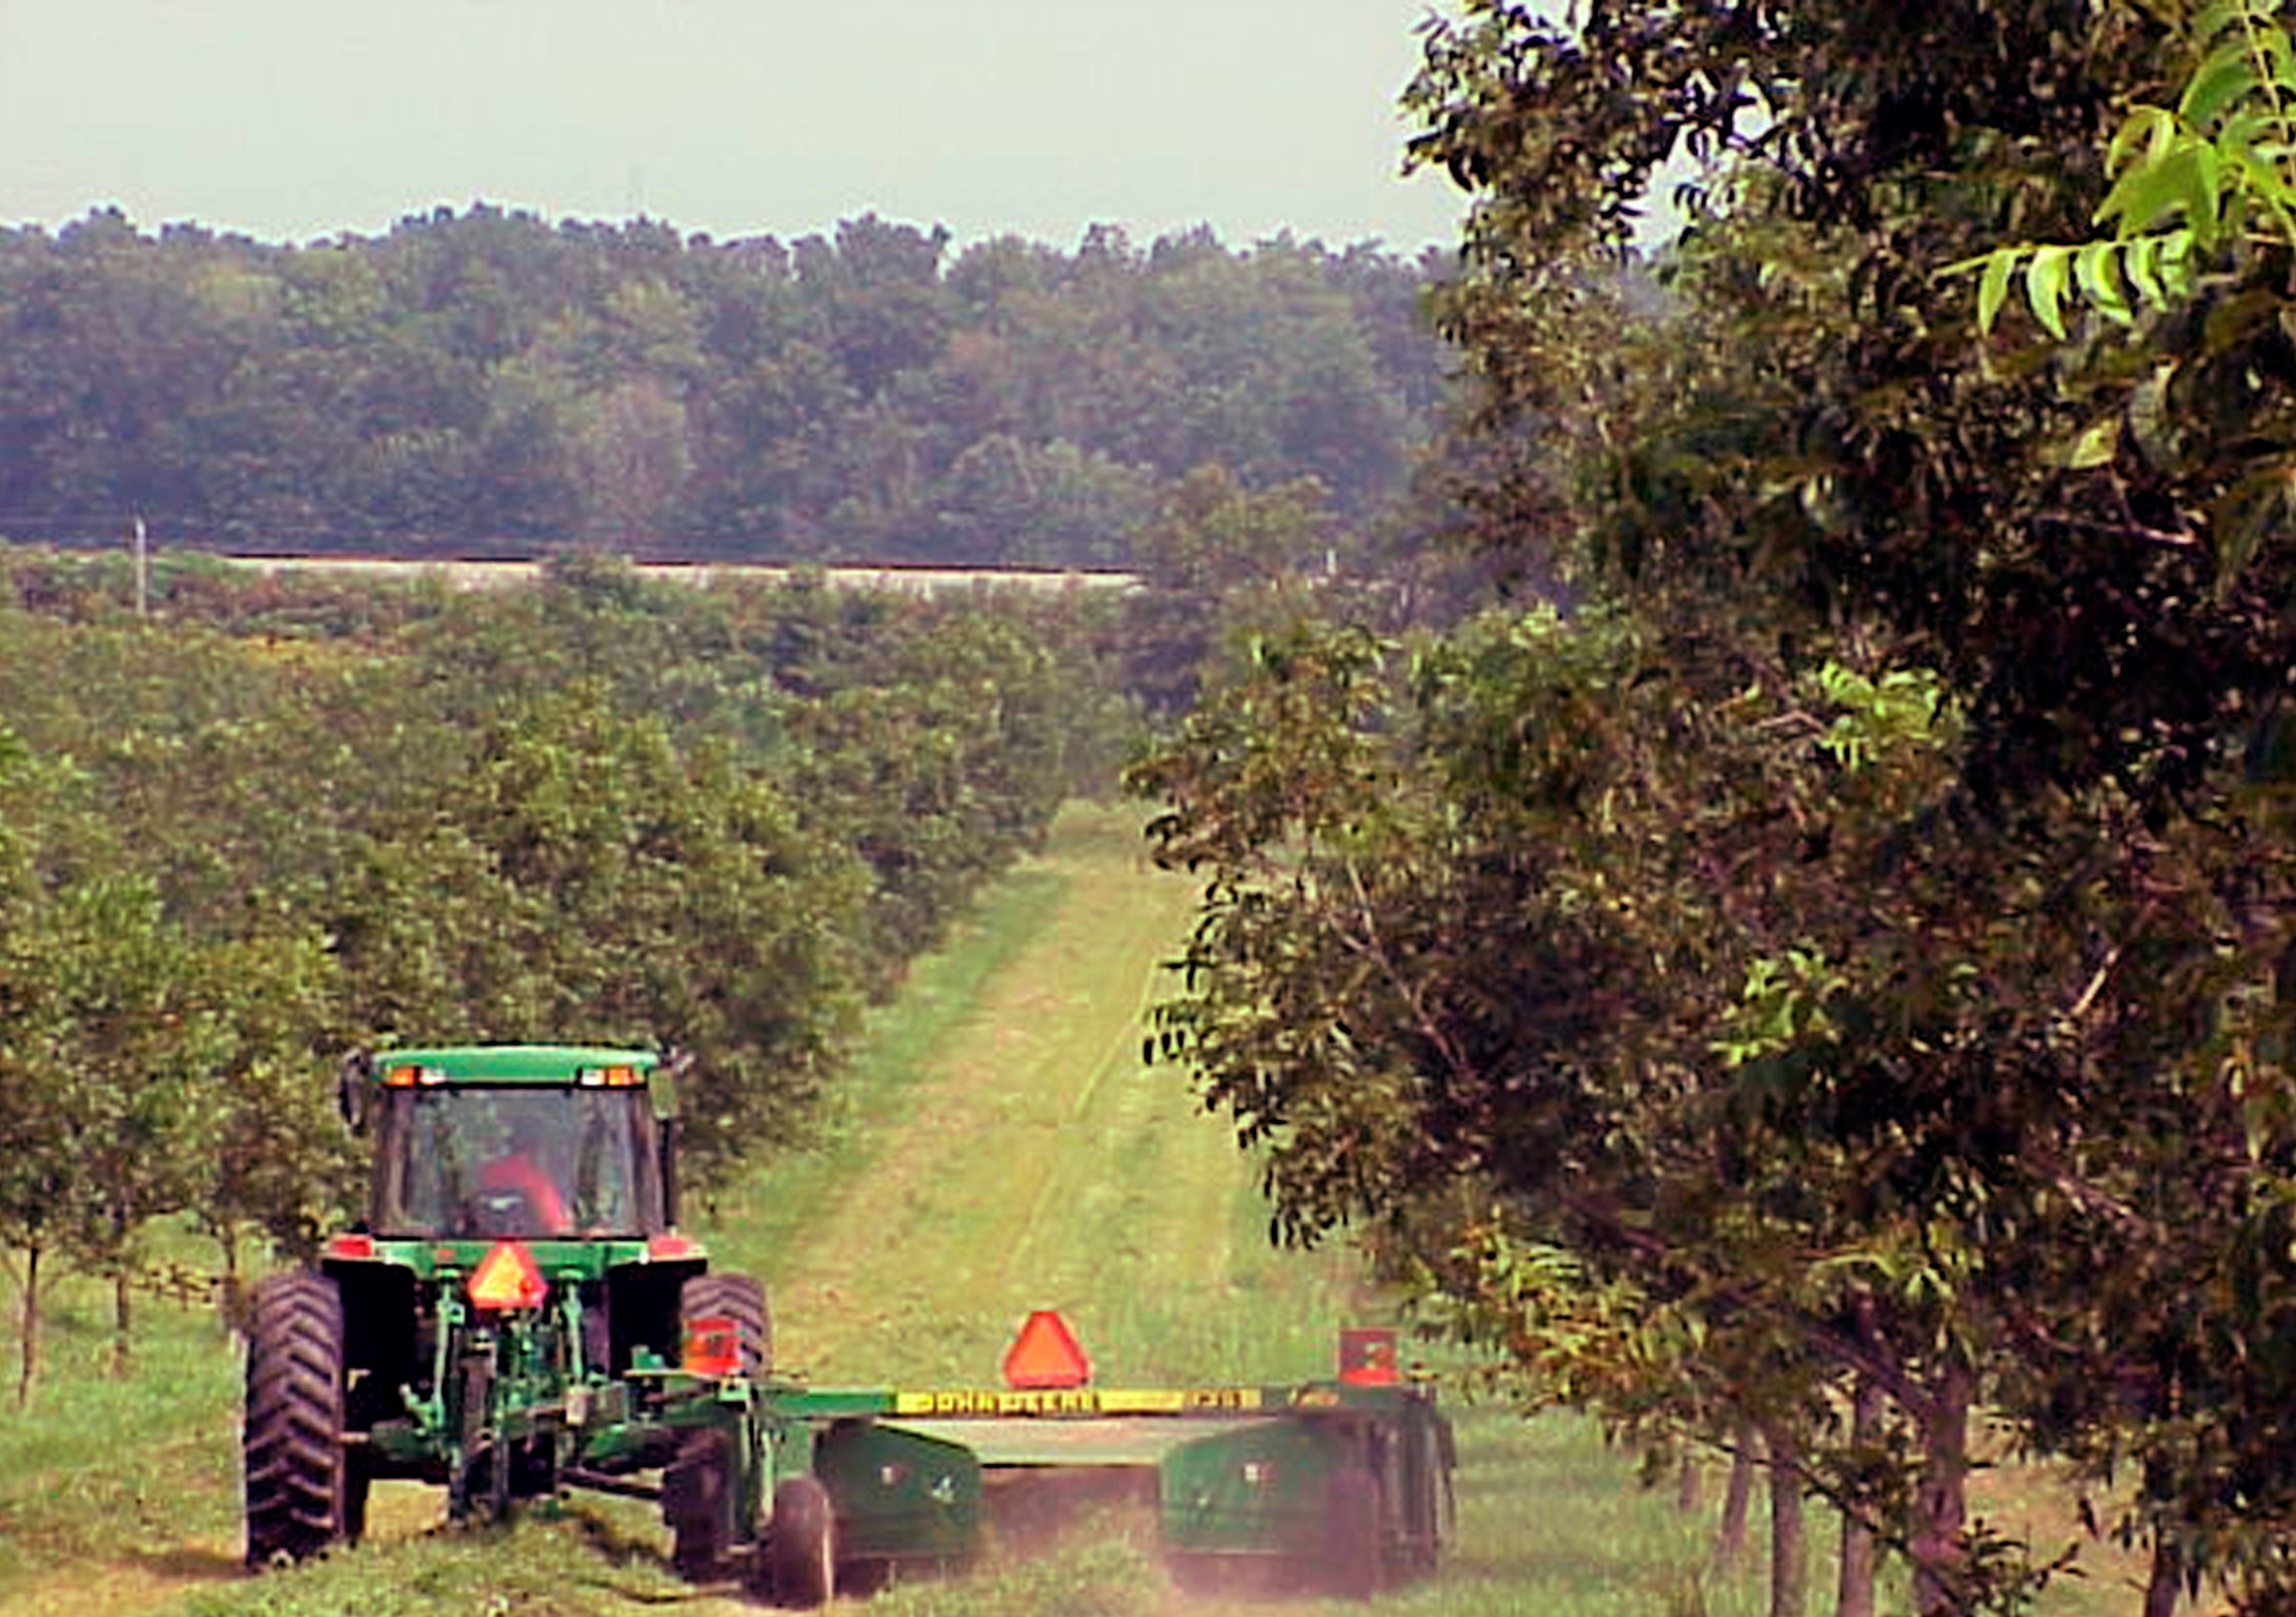 A green tractor rides past a stand of leafy trees.